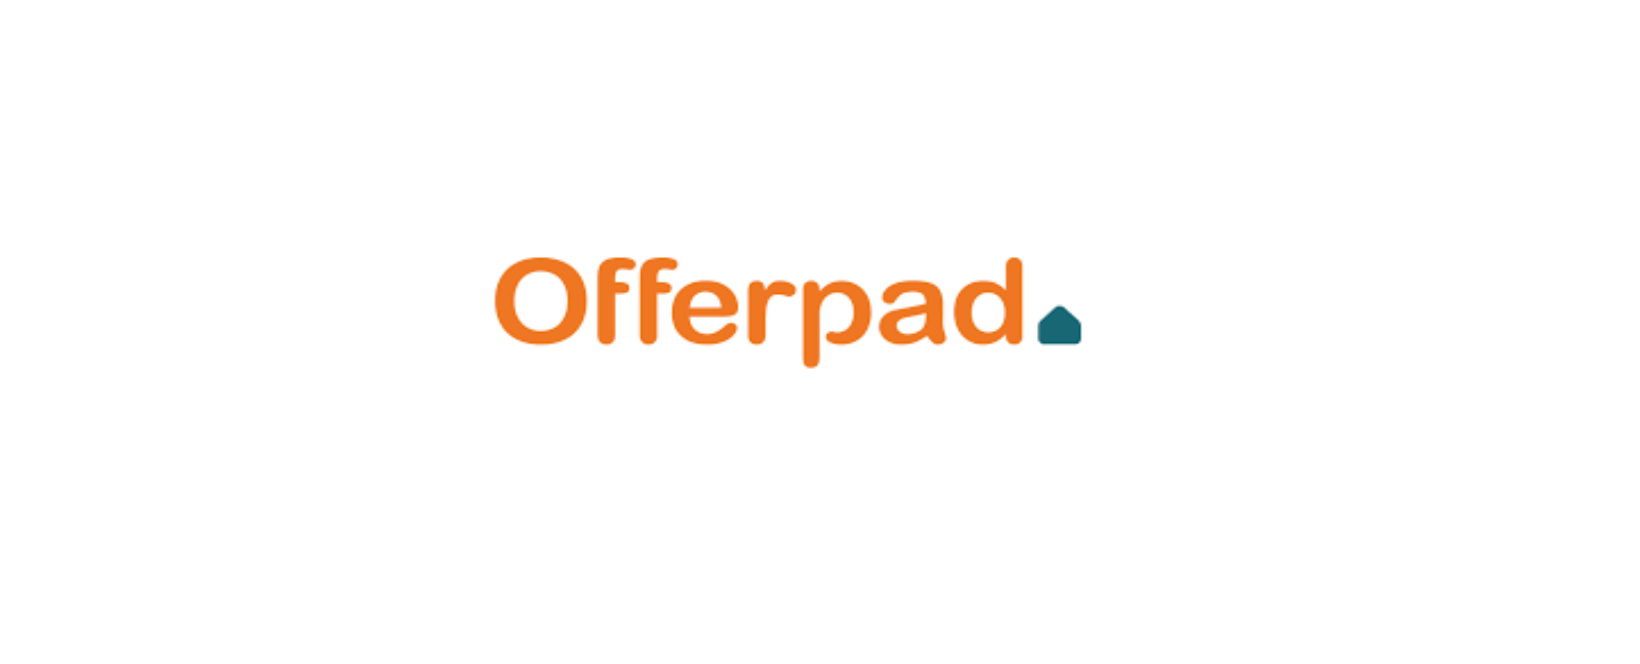 Offerpad Discount Code 2022